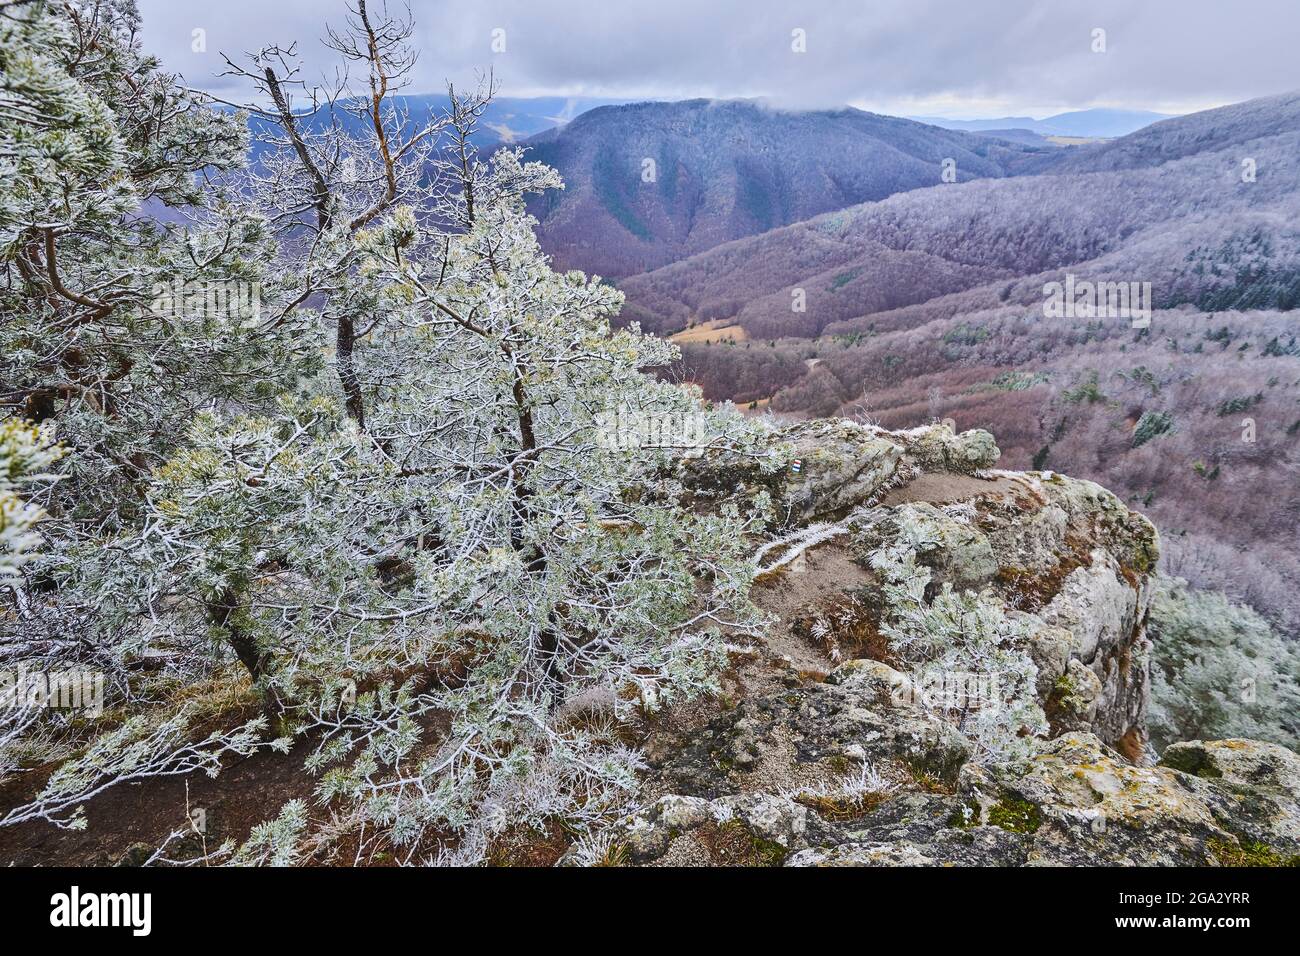 Close-up of snowy Scots pine (Pinus sylvestris) trees on the mountaintop at Mount Vapec in the Strazov Mountains overlooking the mountain views Stock Photo